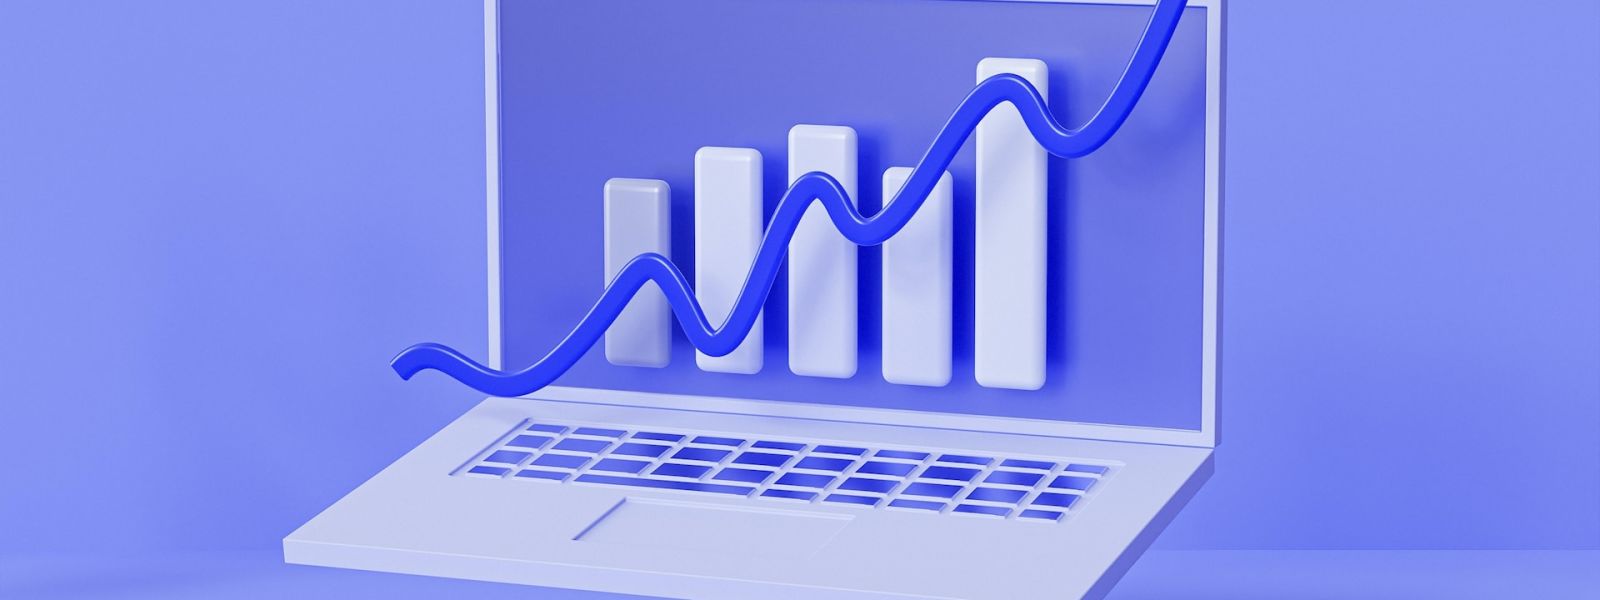 A 3D illustration of a rising bar graph on a laptop screen, symbolizing technological advancements in accounting firm growth strategies.